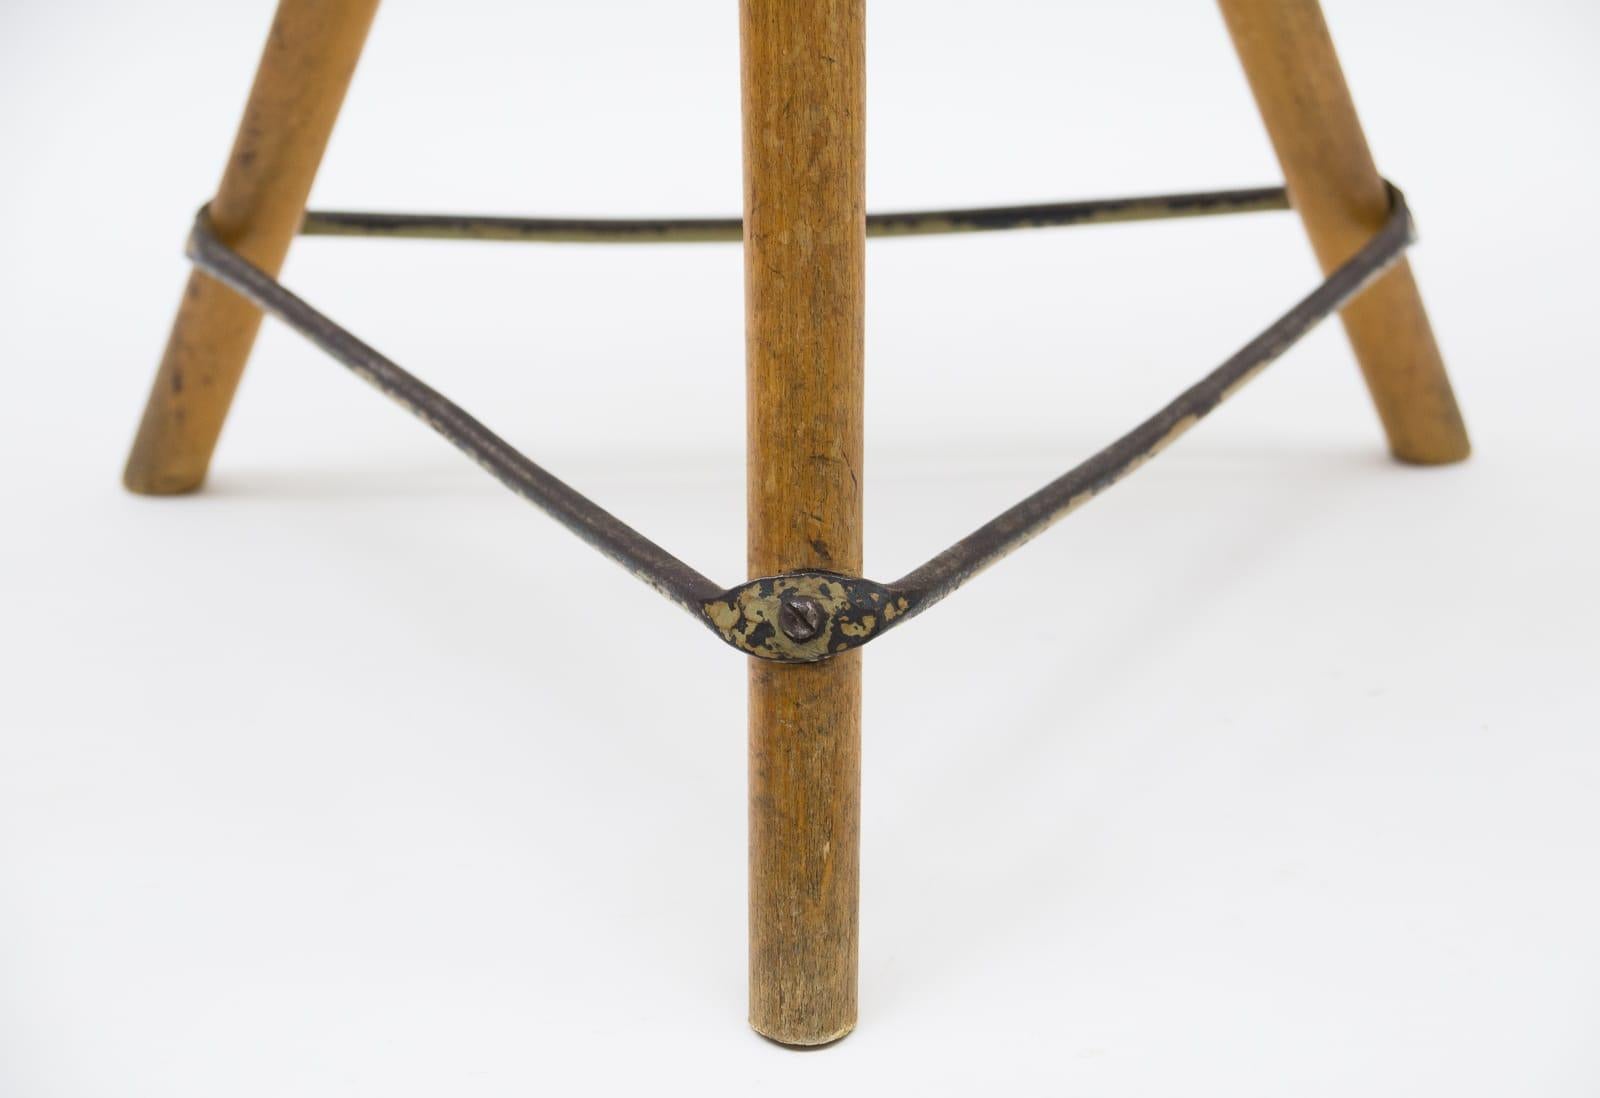 Mid-Century Modern Adjustable Swiss Stool in Leather Metal and Wood, 1940s/50s For Sale 3